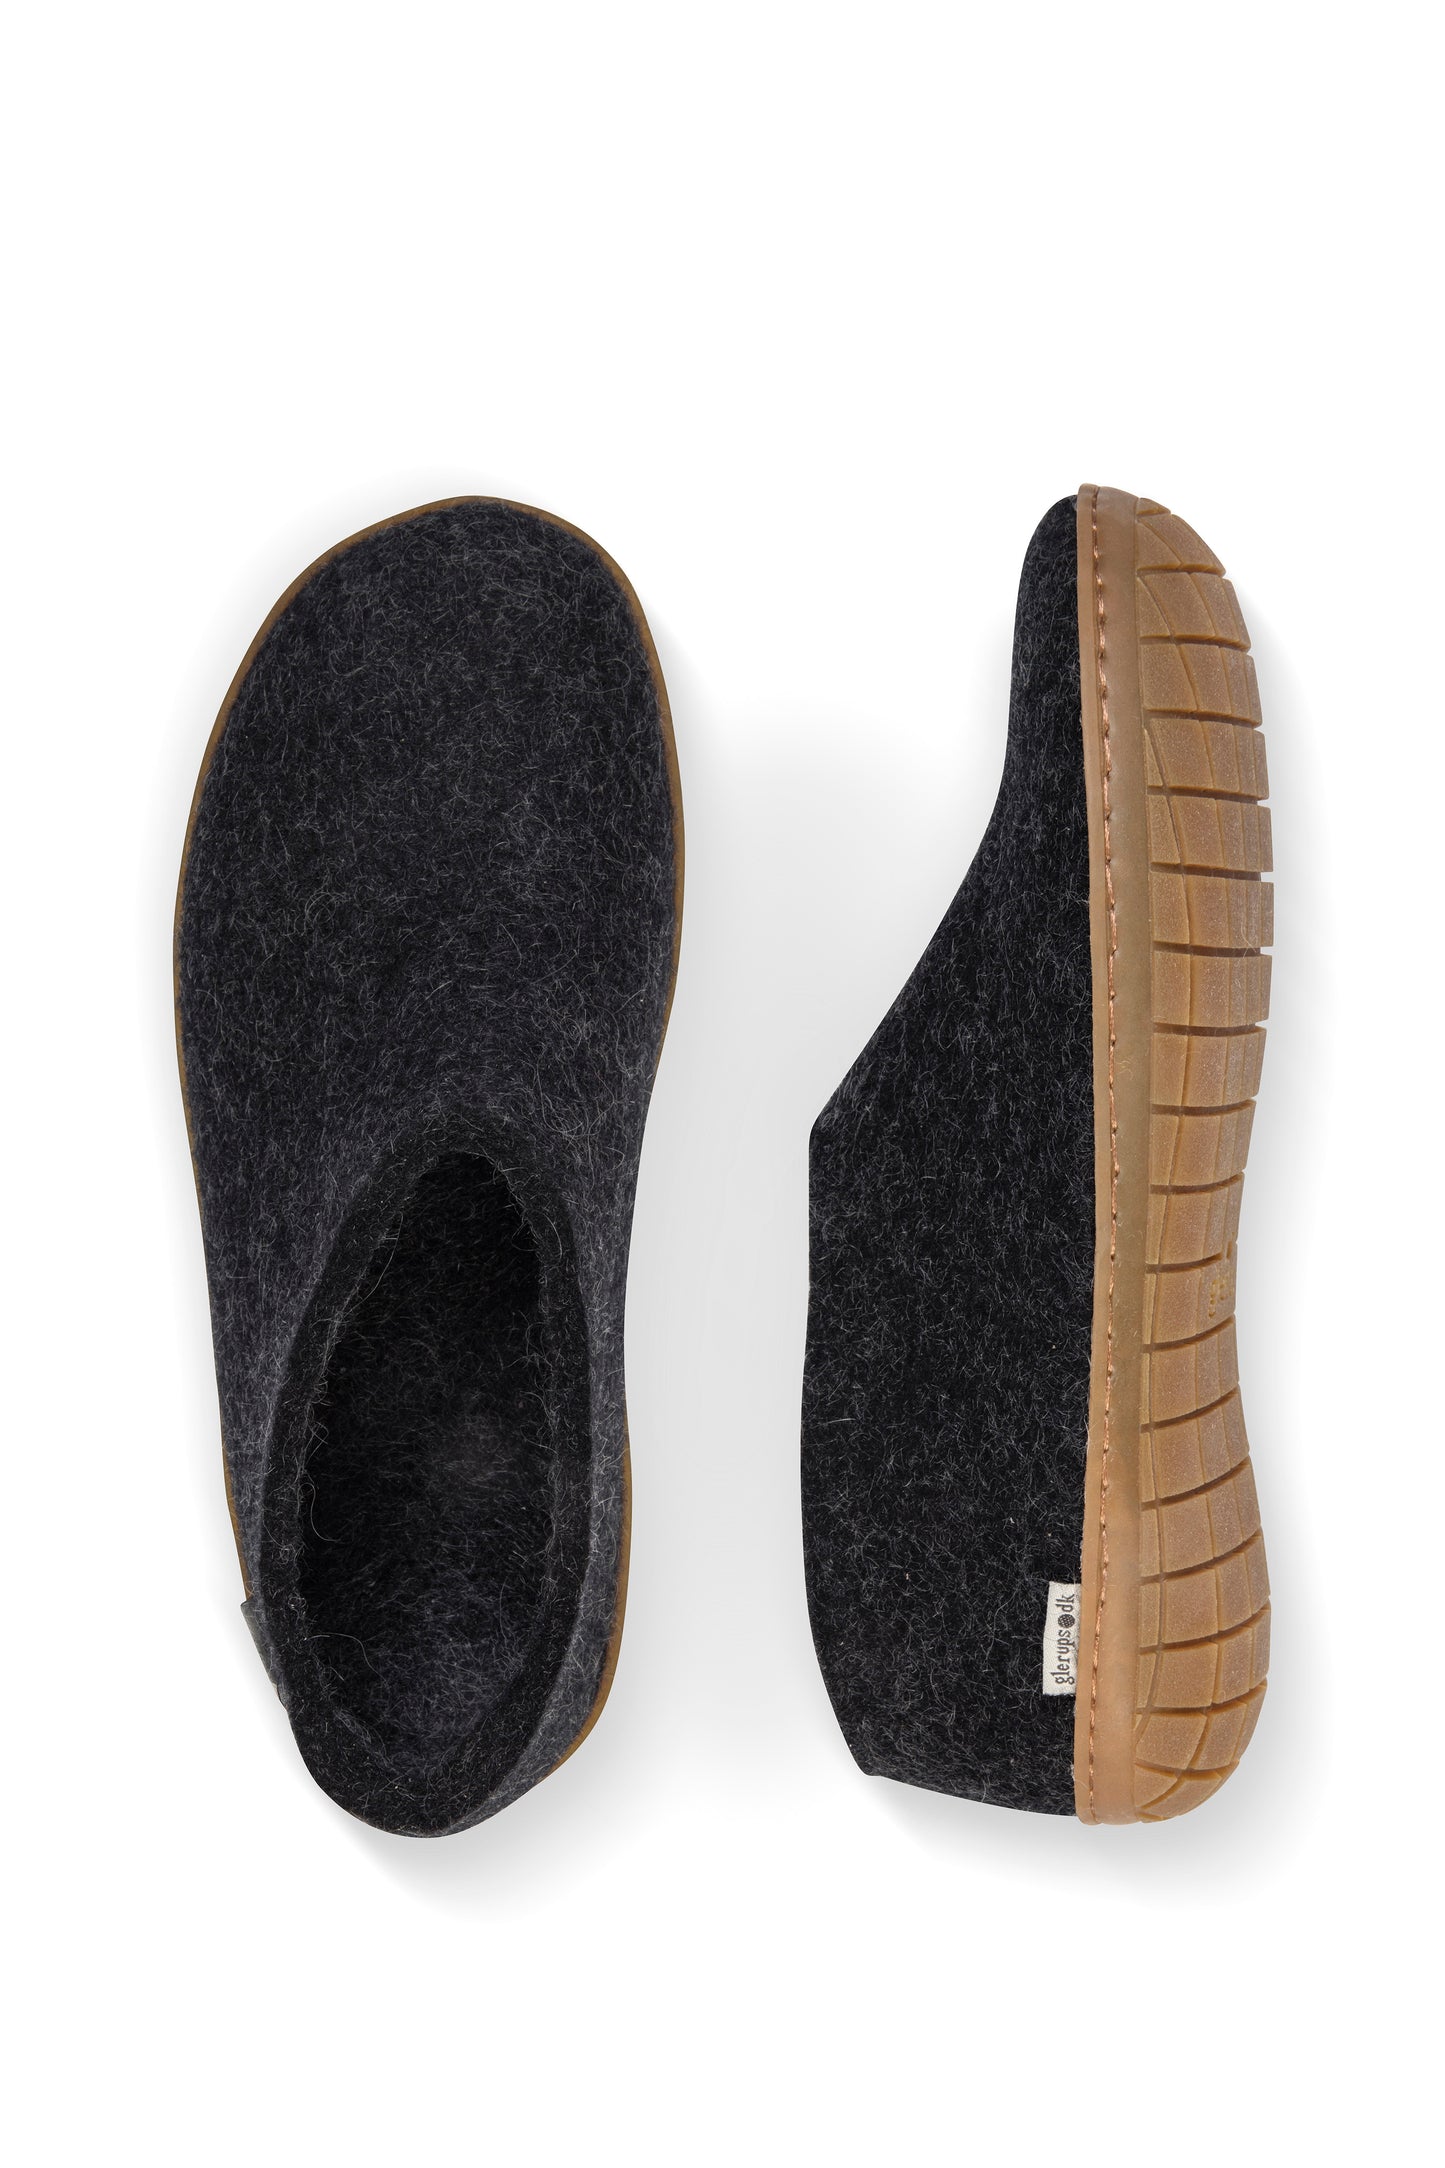 Shoe Rubber Sole Natural Charcoal